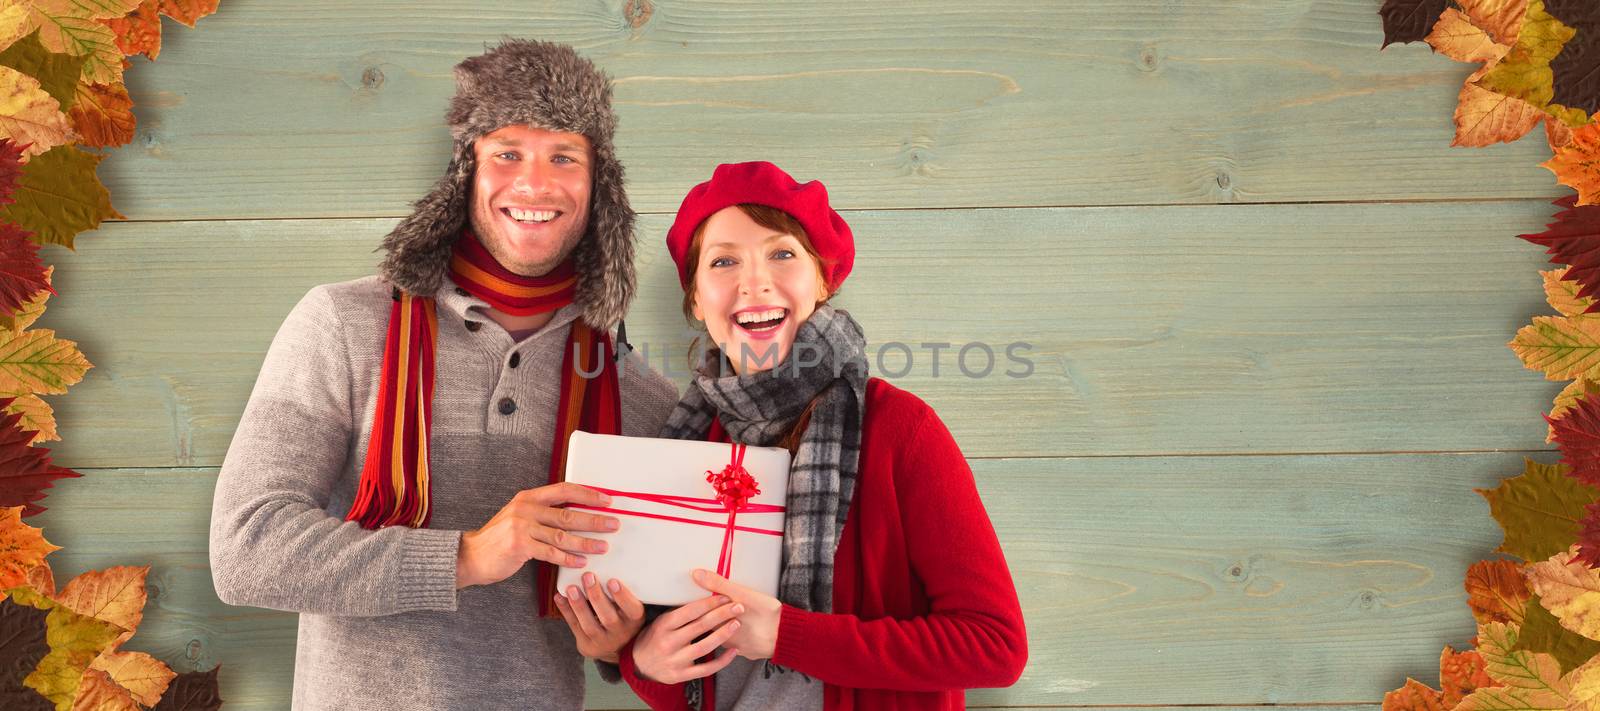 Composite image of couple smiling and holding gift by Wavebreakmedia